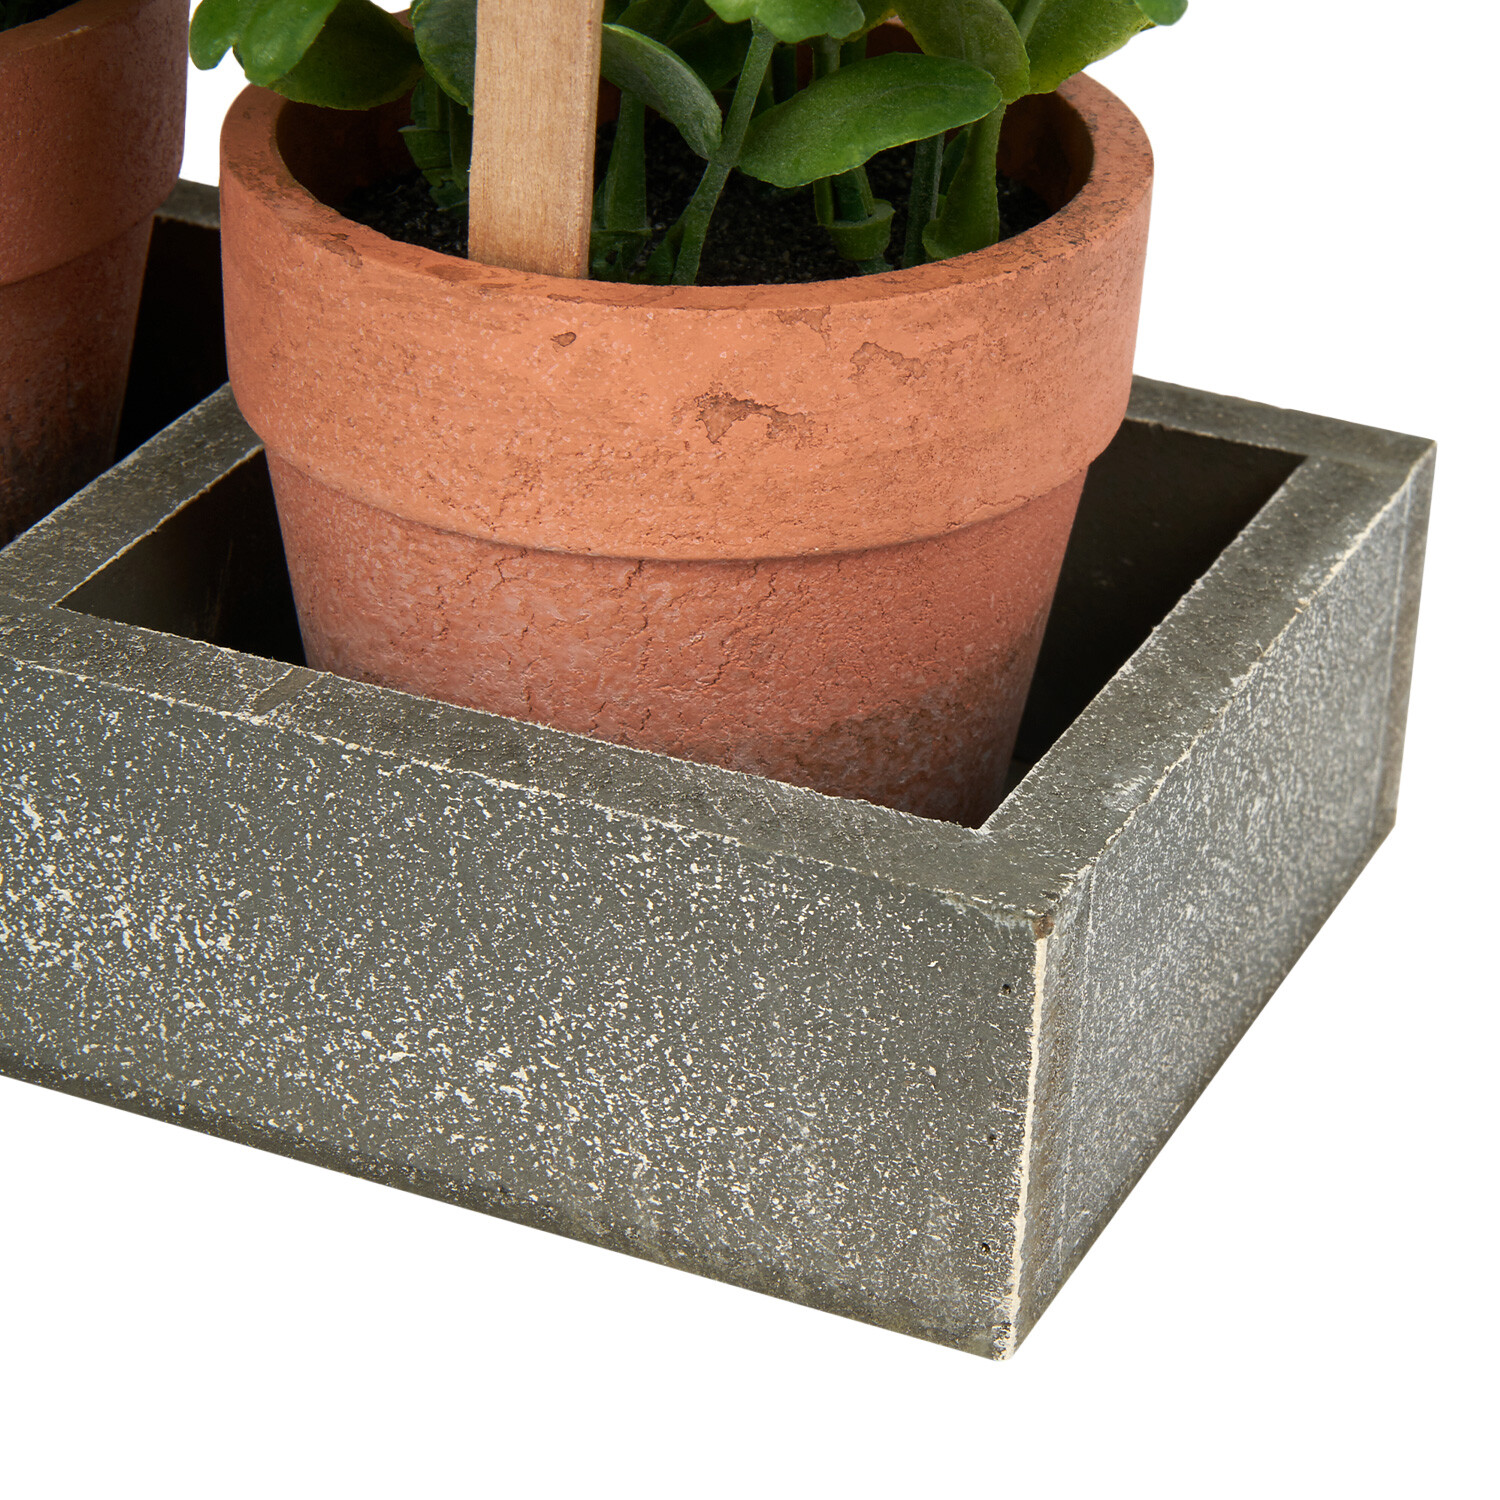 Set of 3 Potted Herbs in Tray - Grey Image 3